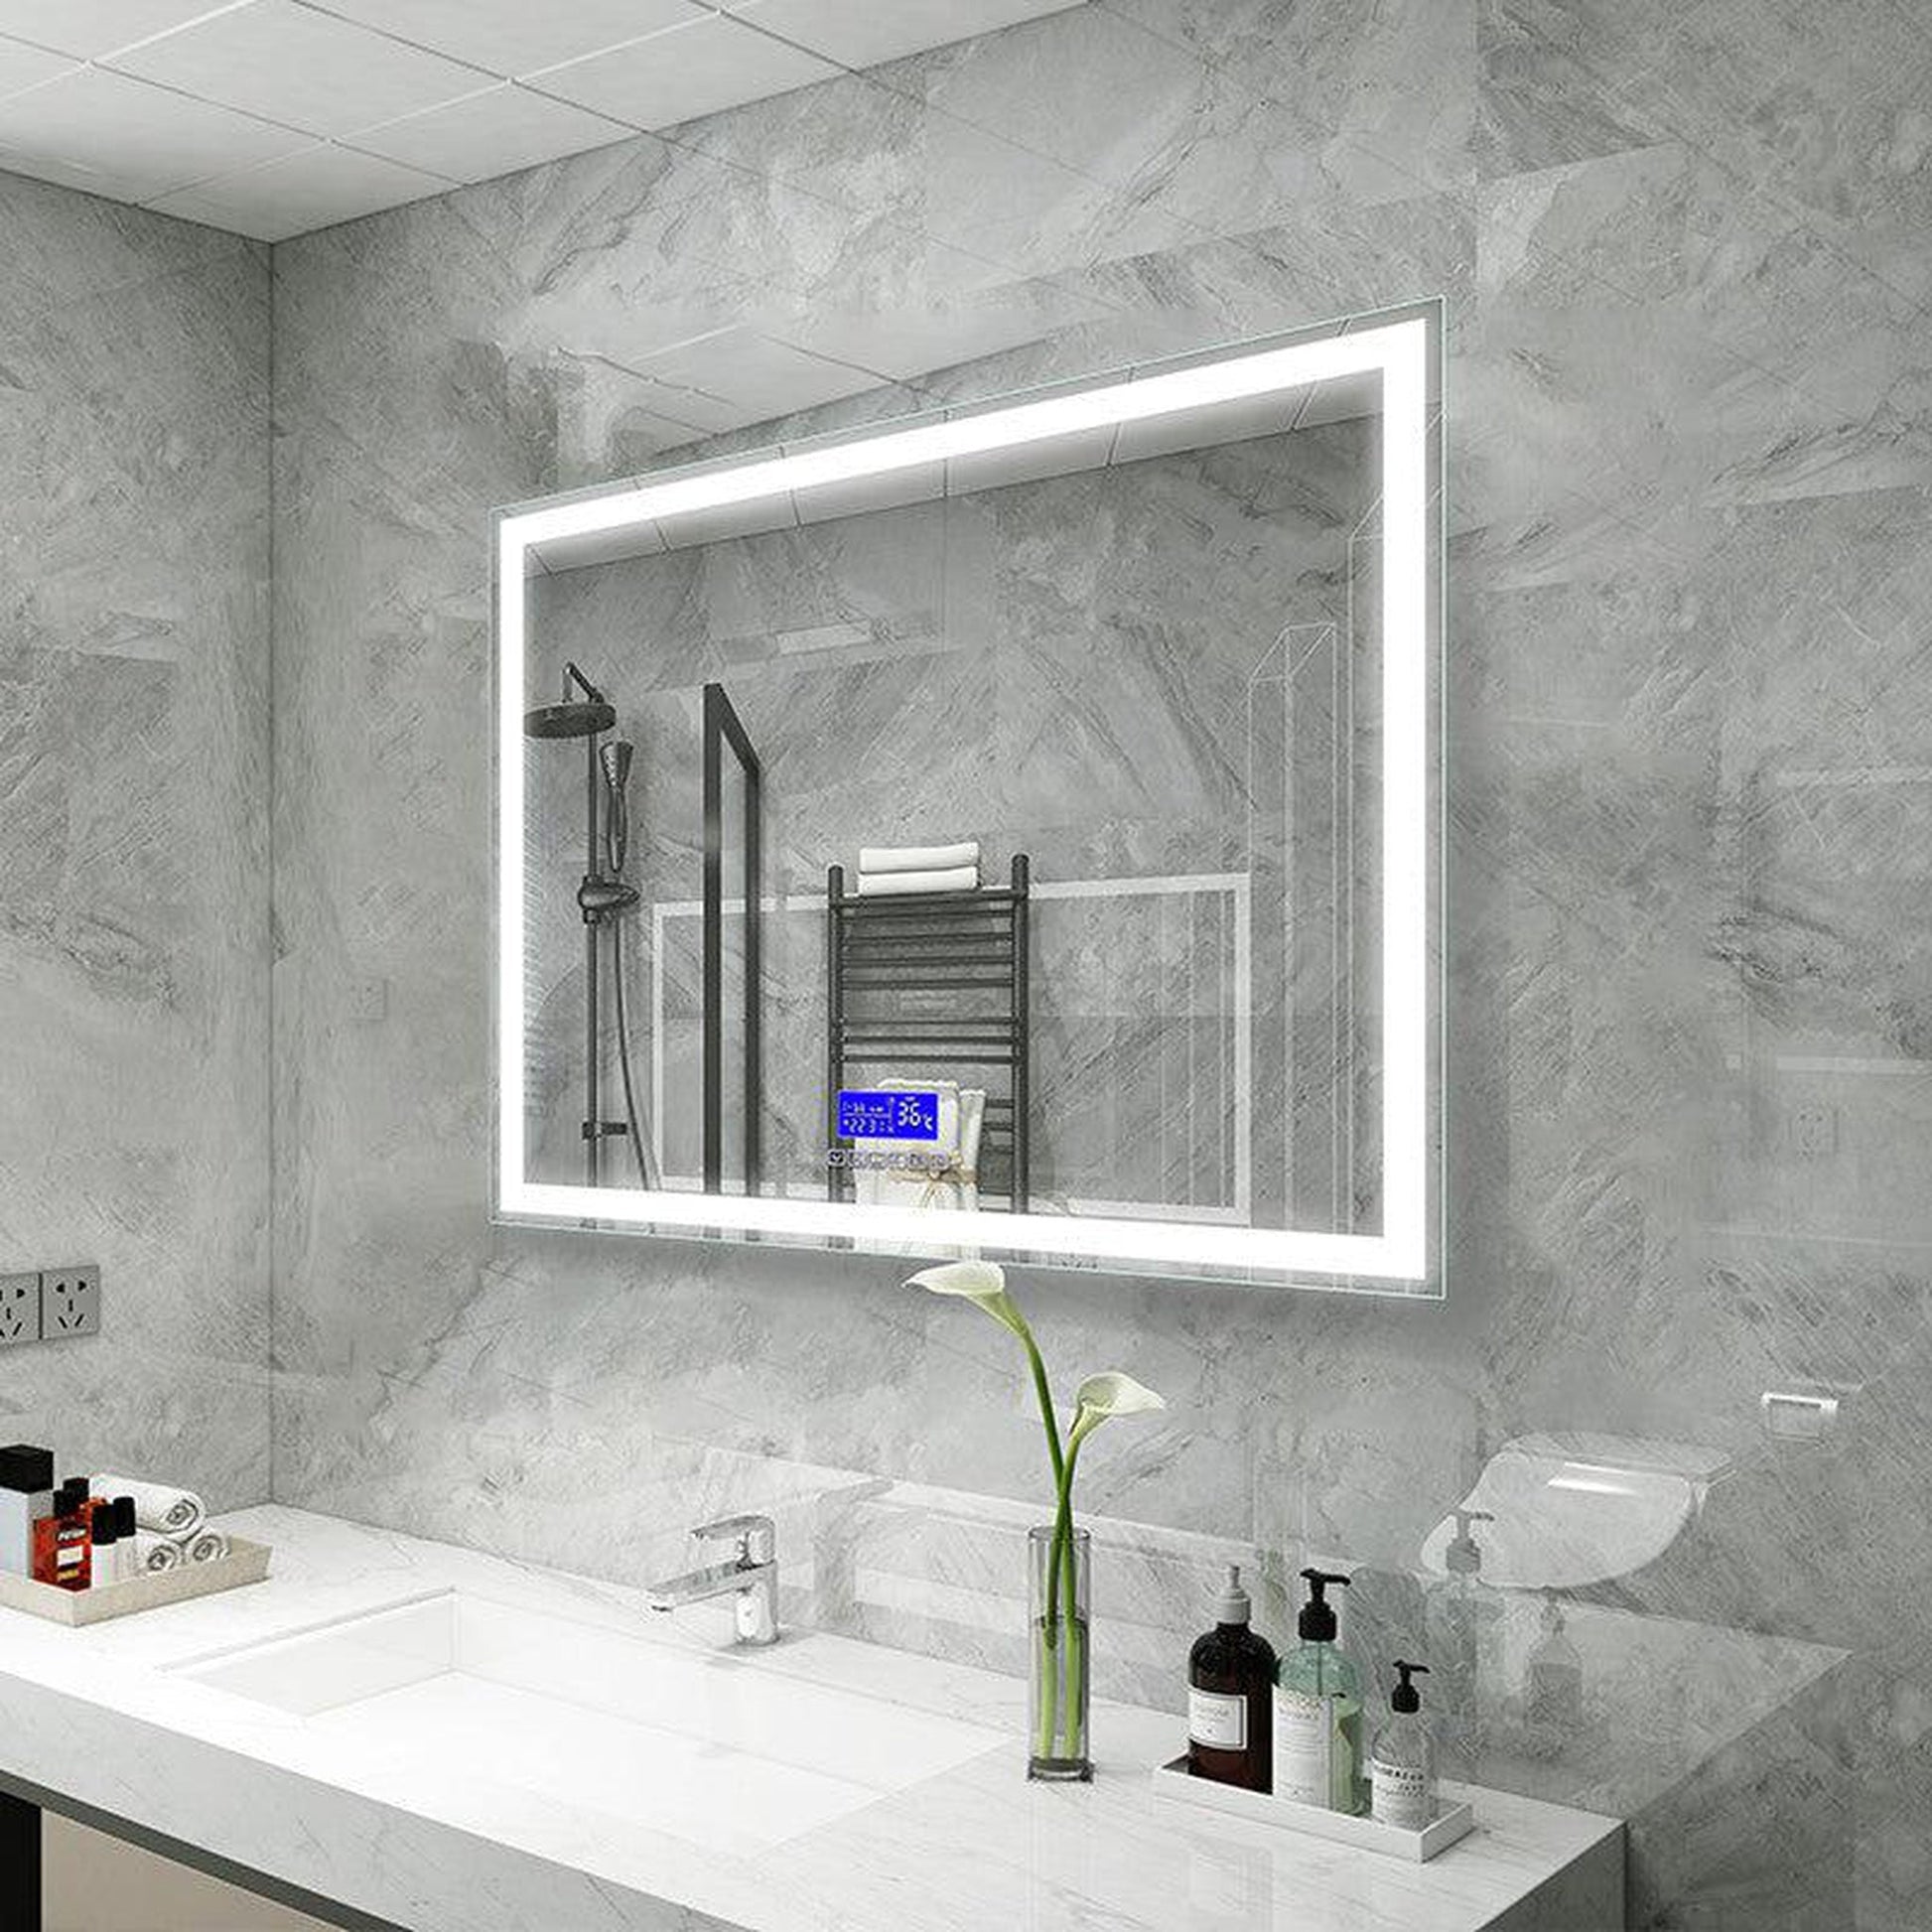 Moreno Florence 47" x 36" Frameless LED Mirror With Bluetooth, Time, and Temperature